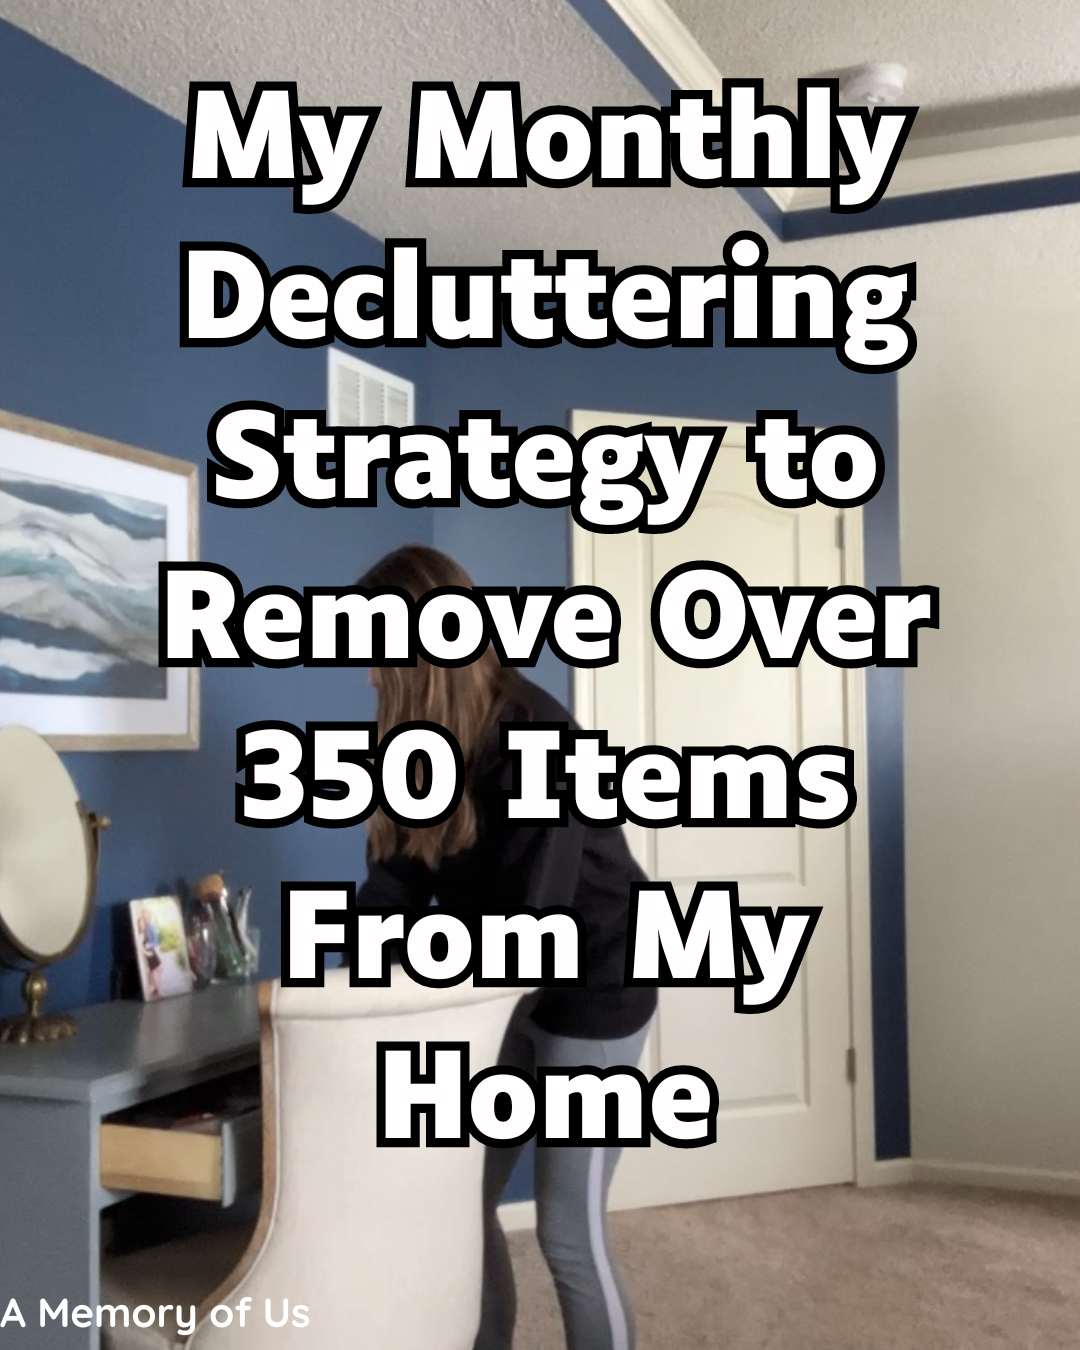 Monthly Decluttering Strategy | Decluttering Checklist | Declutter Challenge | Minimalism in the Home | How to Be a Minimalist | Decluttering | Declutter With Me | Monthly Declutter Challenge | Declutter Your Home